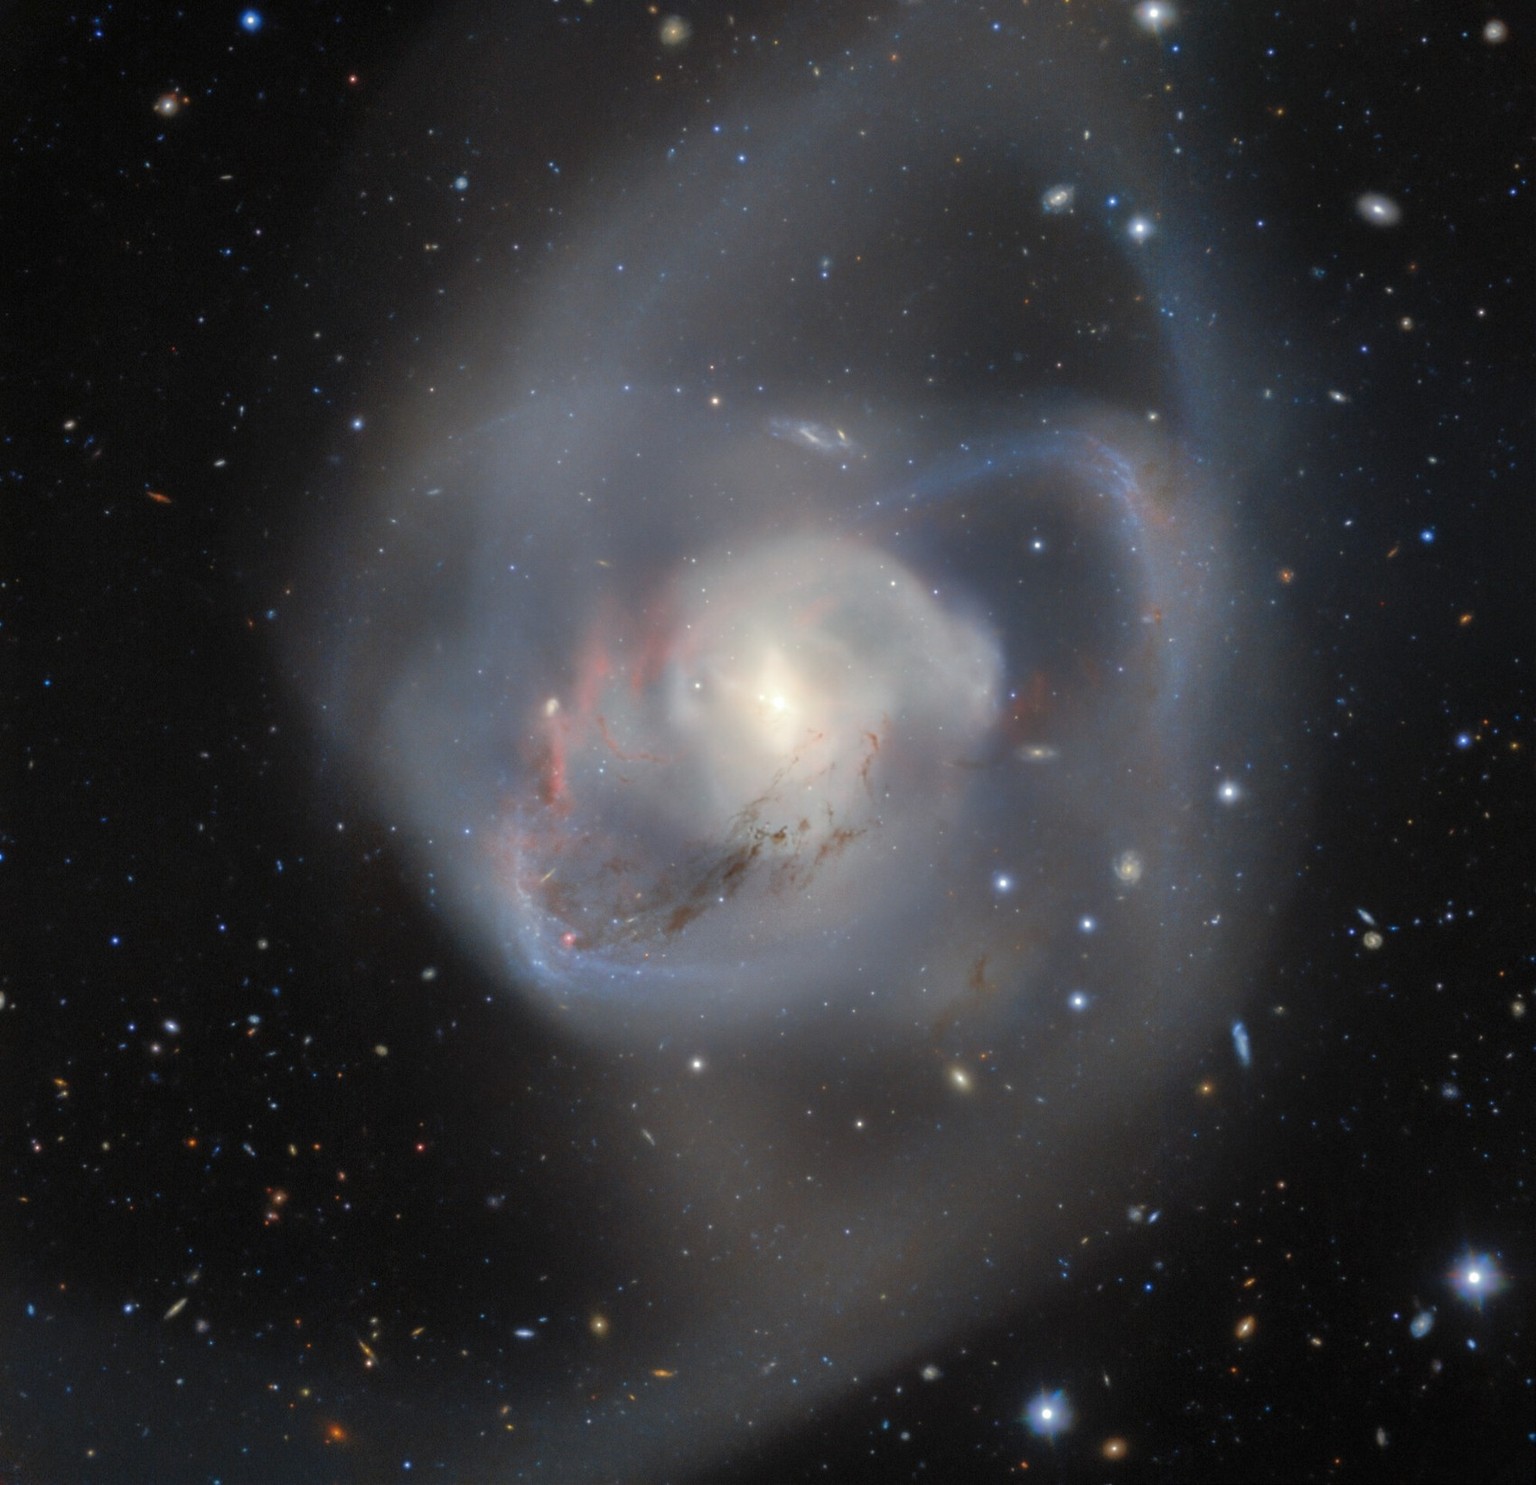 Gemini South, one half of the International Gemini Observatory operated by NSF’s NOIRLab, captures the billion-year-old aftermath of a double spiral galaxy collision. At the heart of this chaotic inte ...